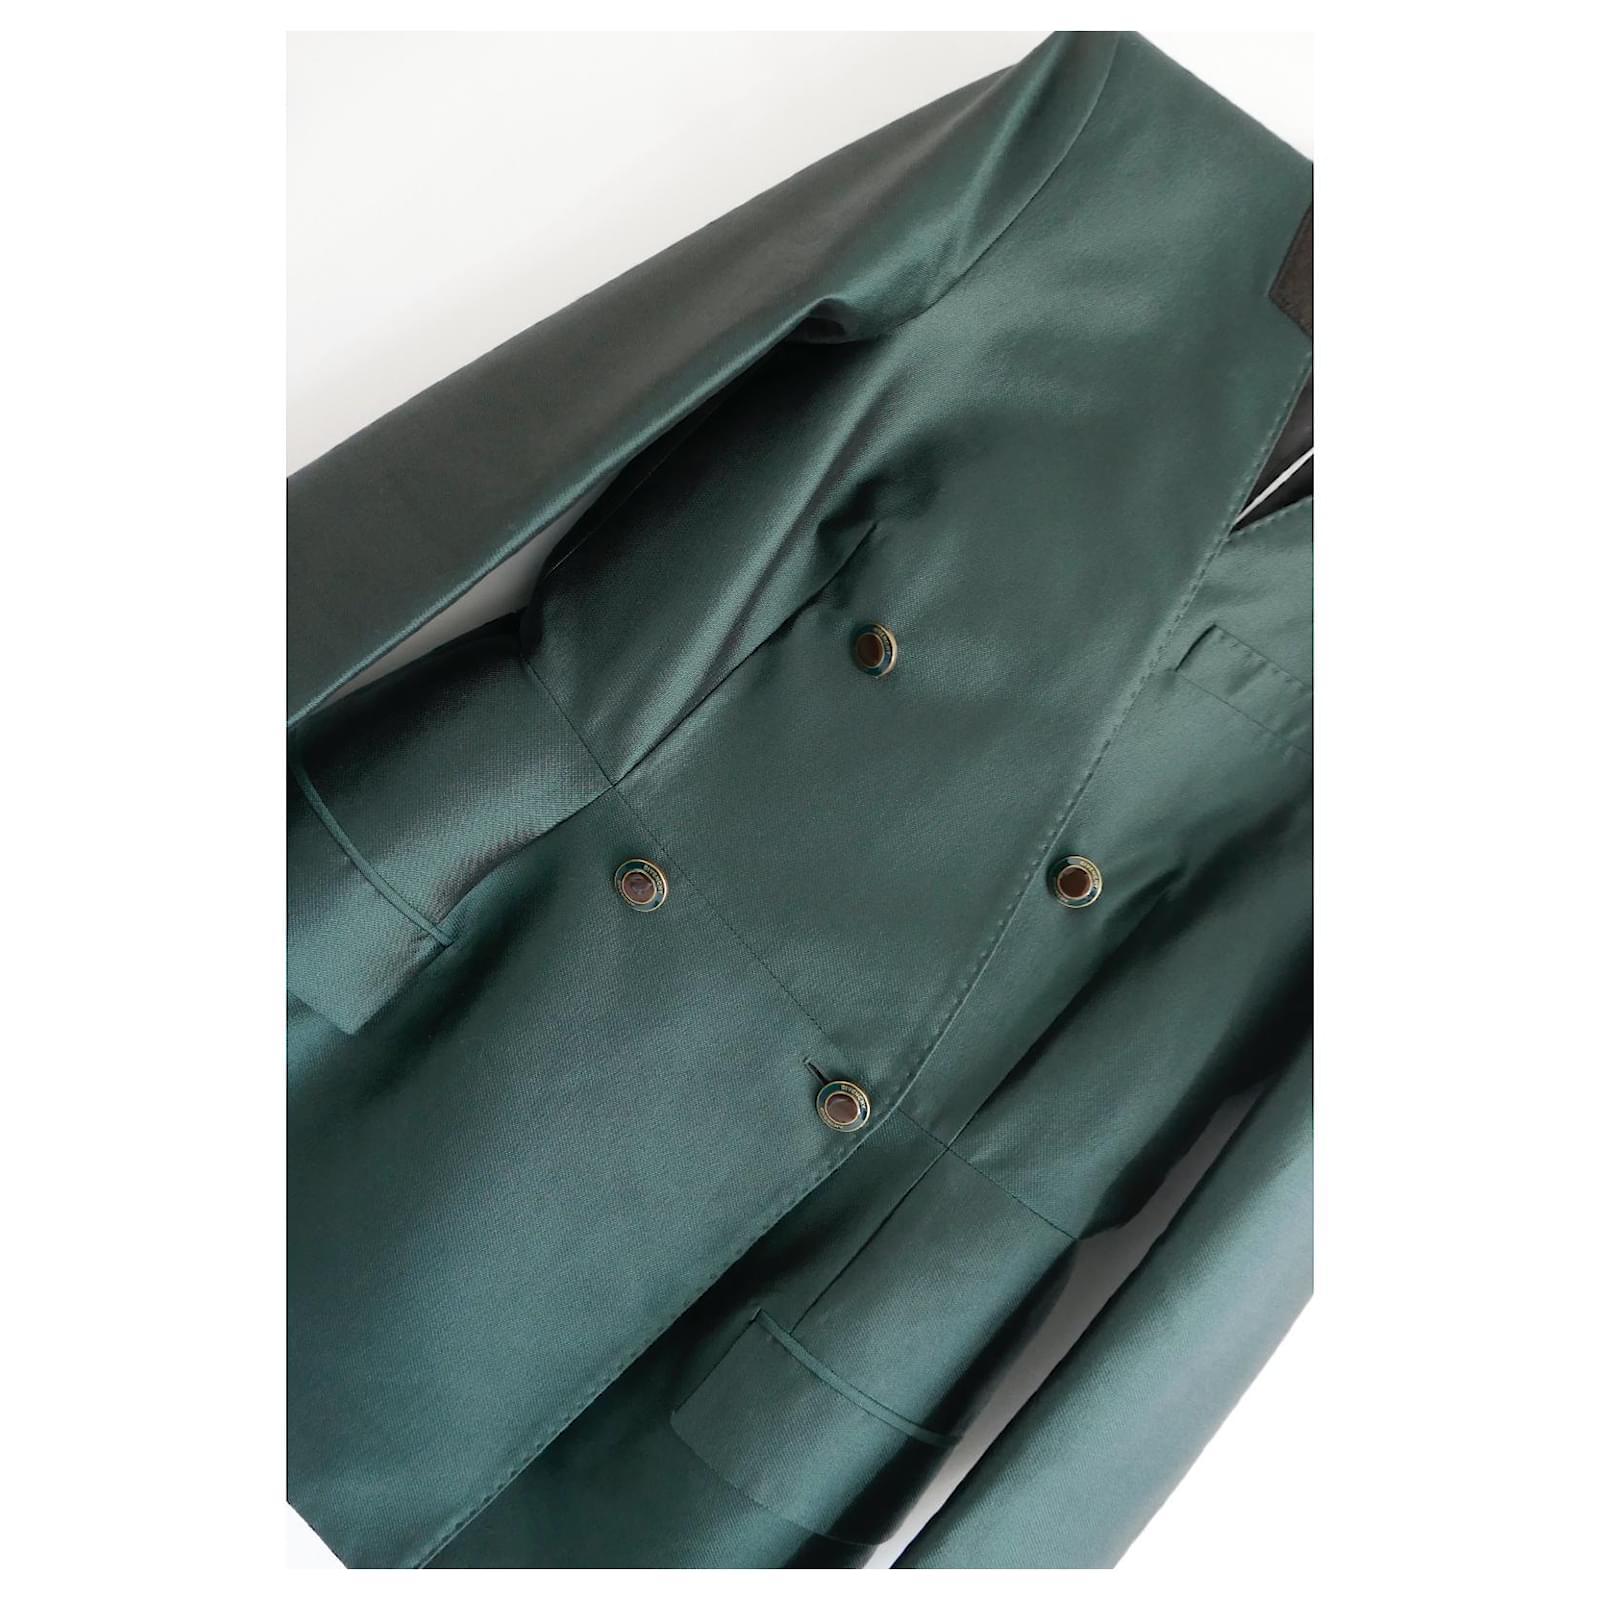 Givenchy SS20 Bottle Green Wool & Silk Hourglass Blazer Jacket  In Excellent Condition For Sale In London, GB